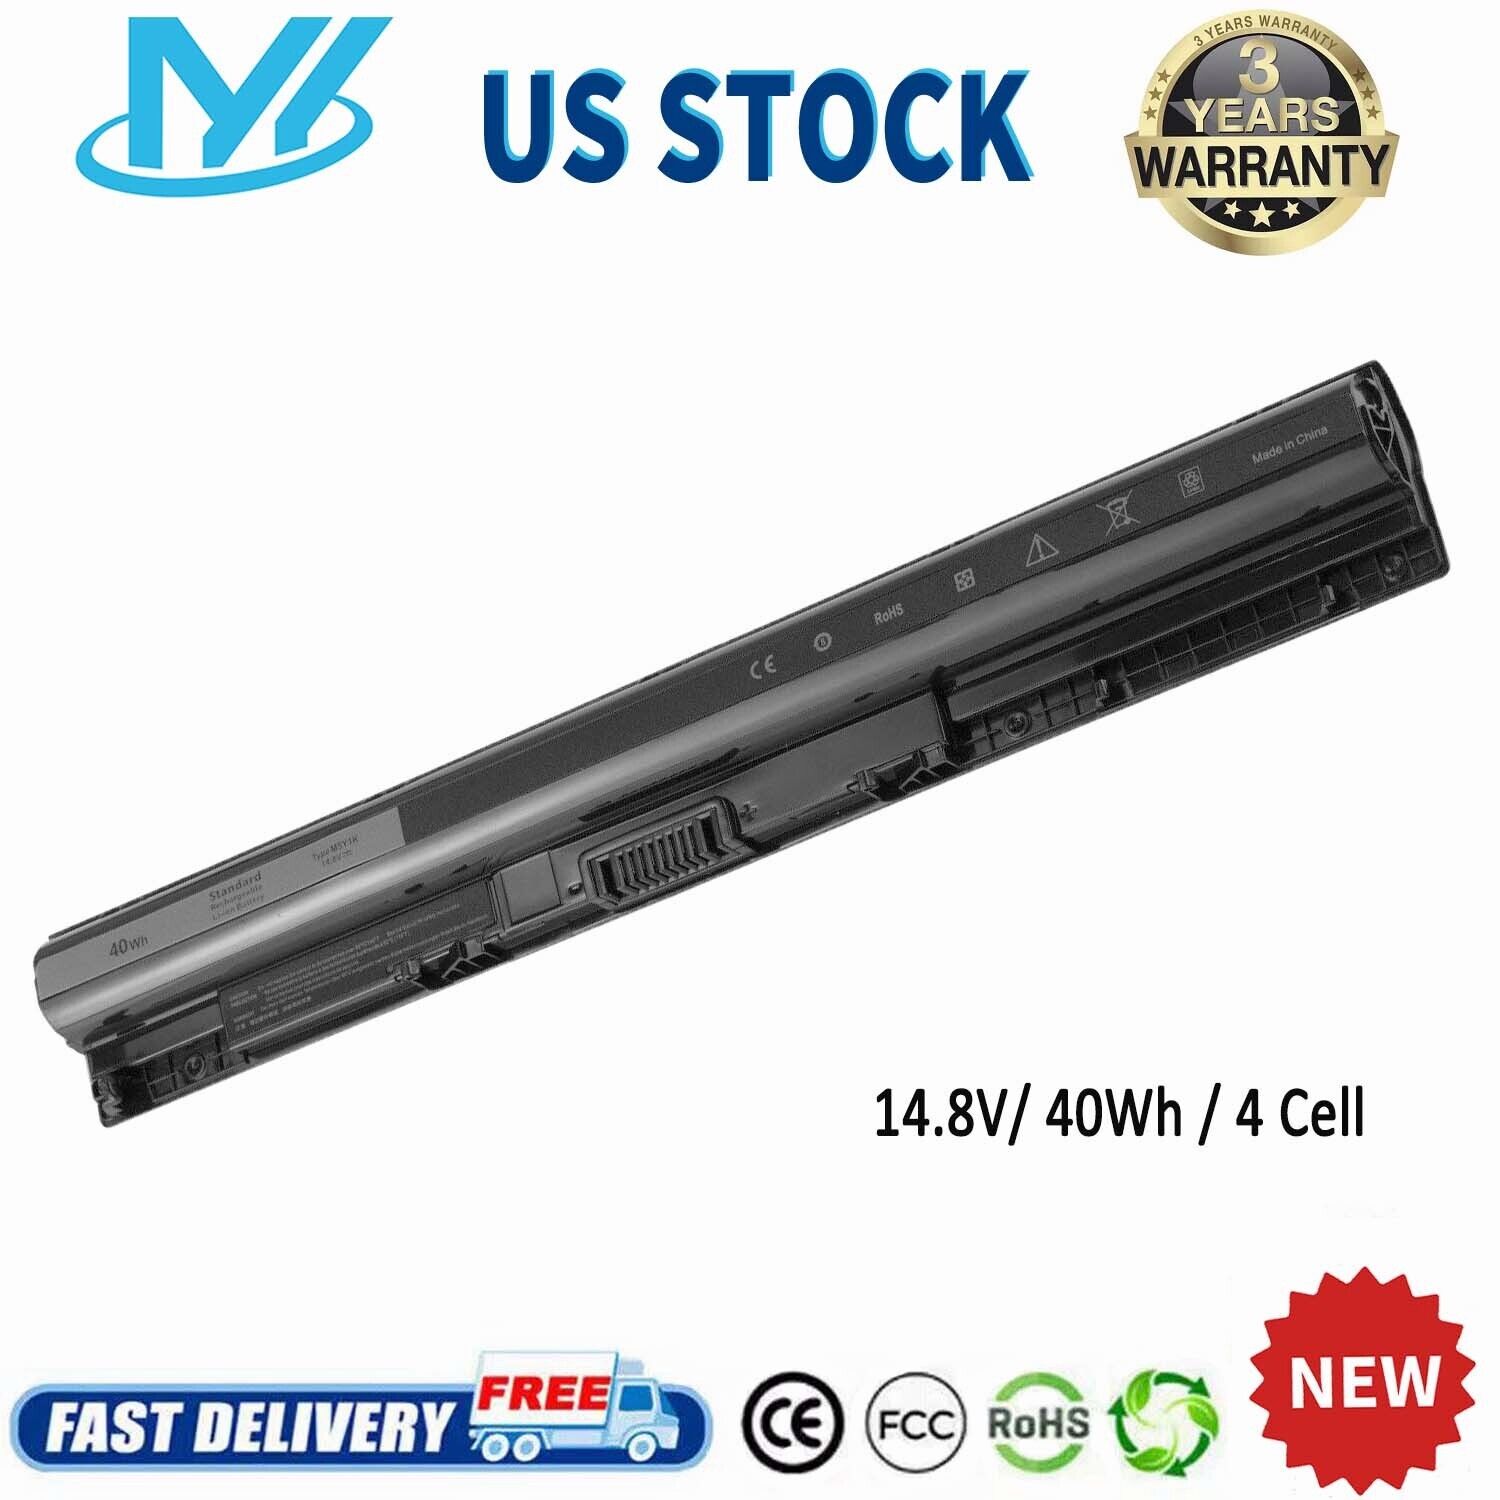 ✅M5Y1K Laptop Battery 40Wh For Dell Inspiron 3451 5451 5551 5555 5558 5559 14.8V